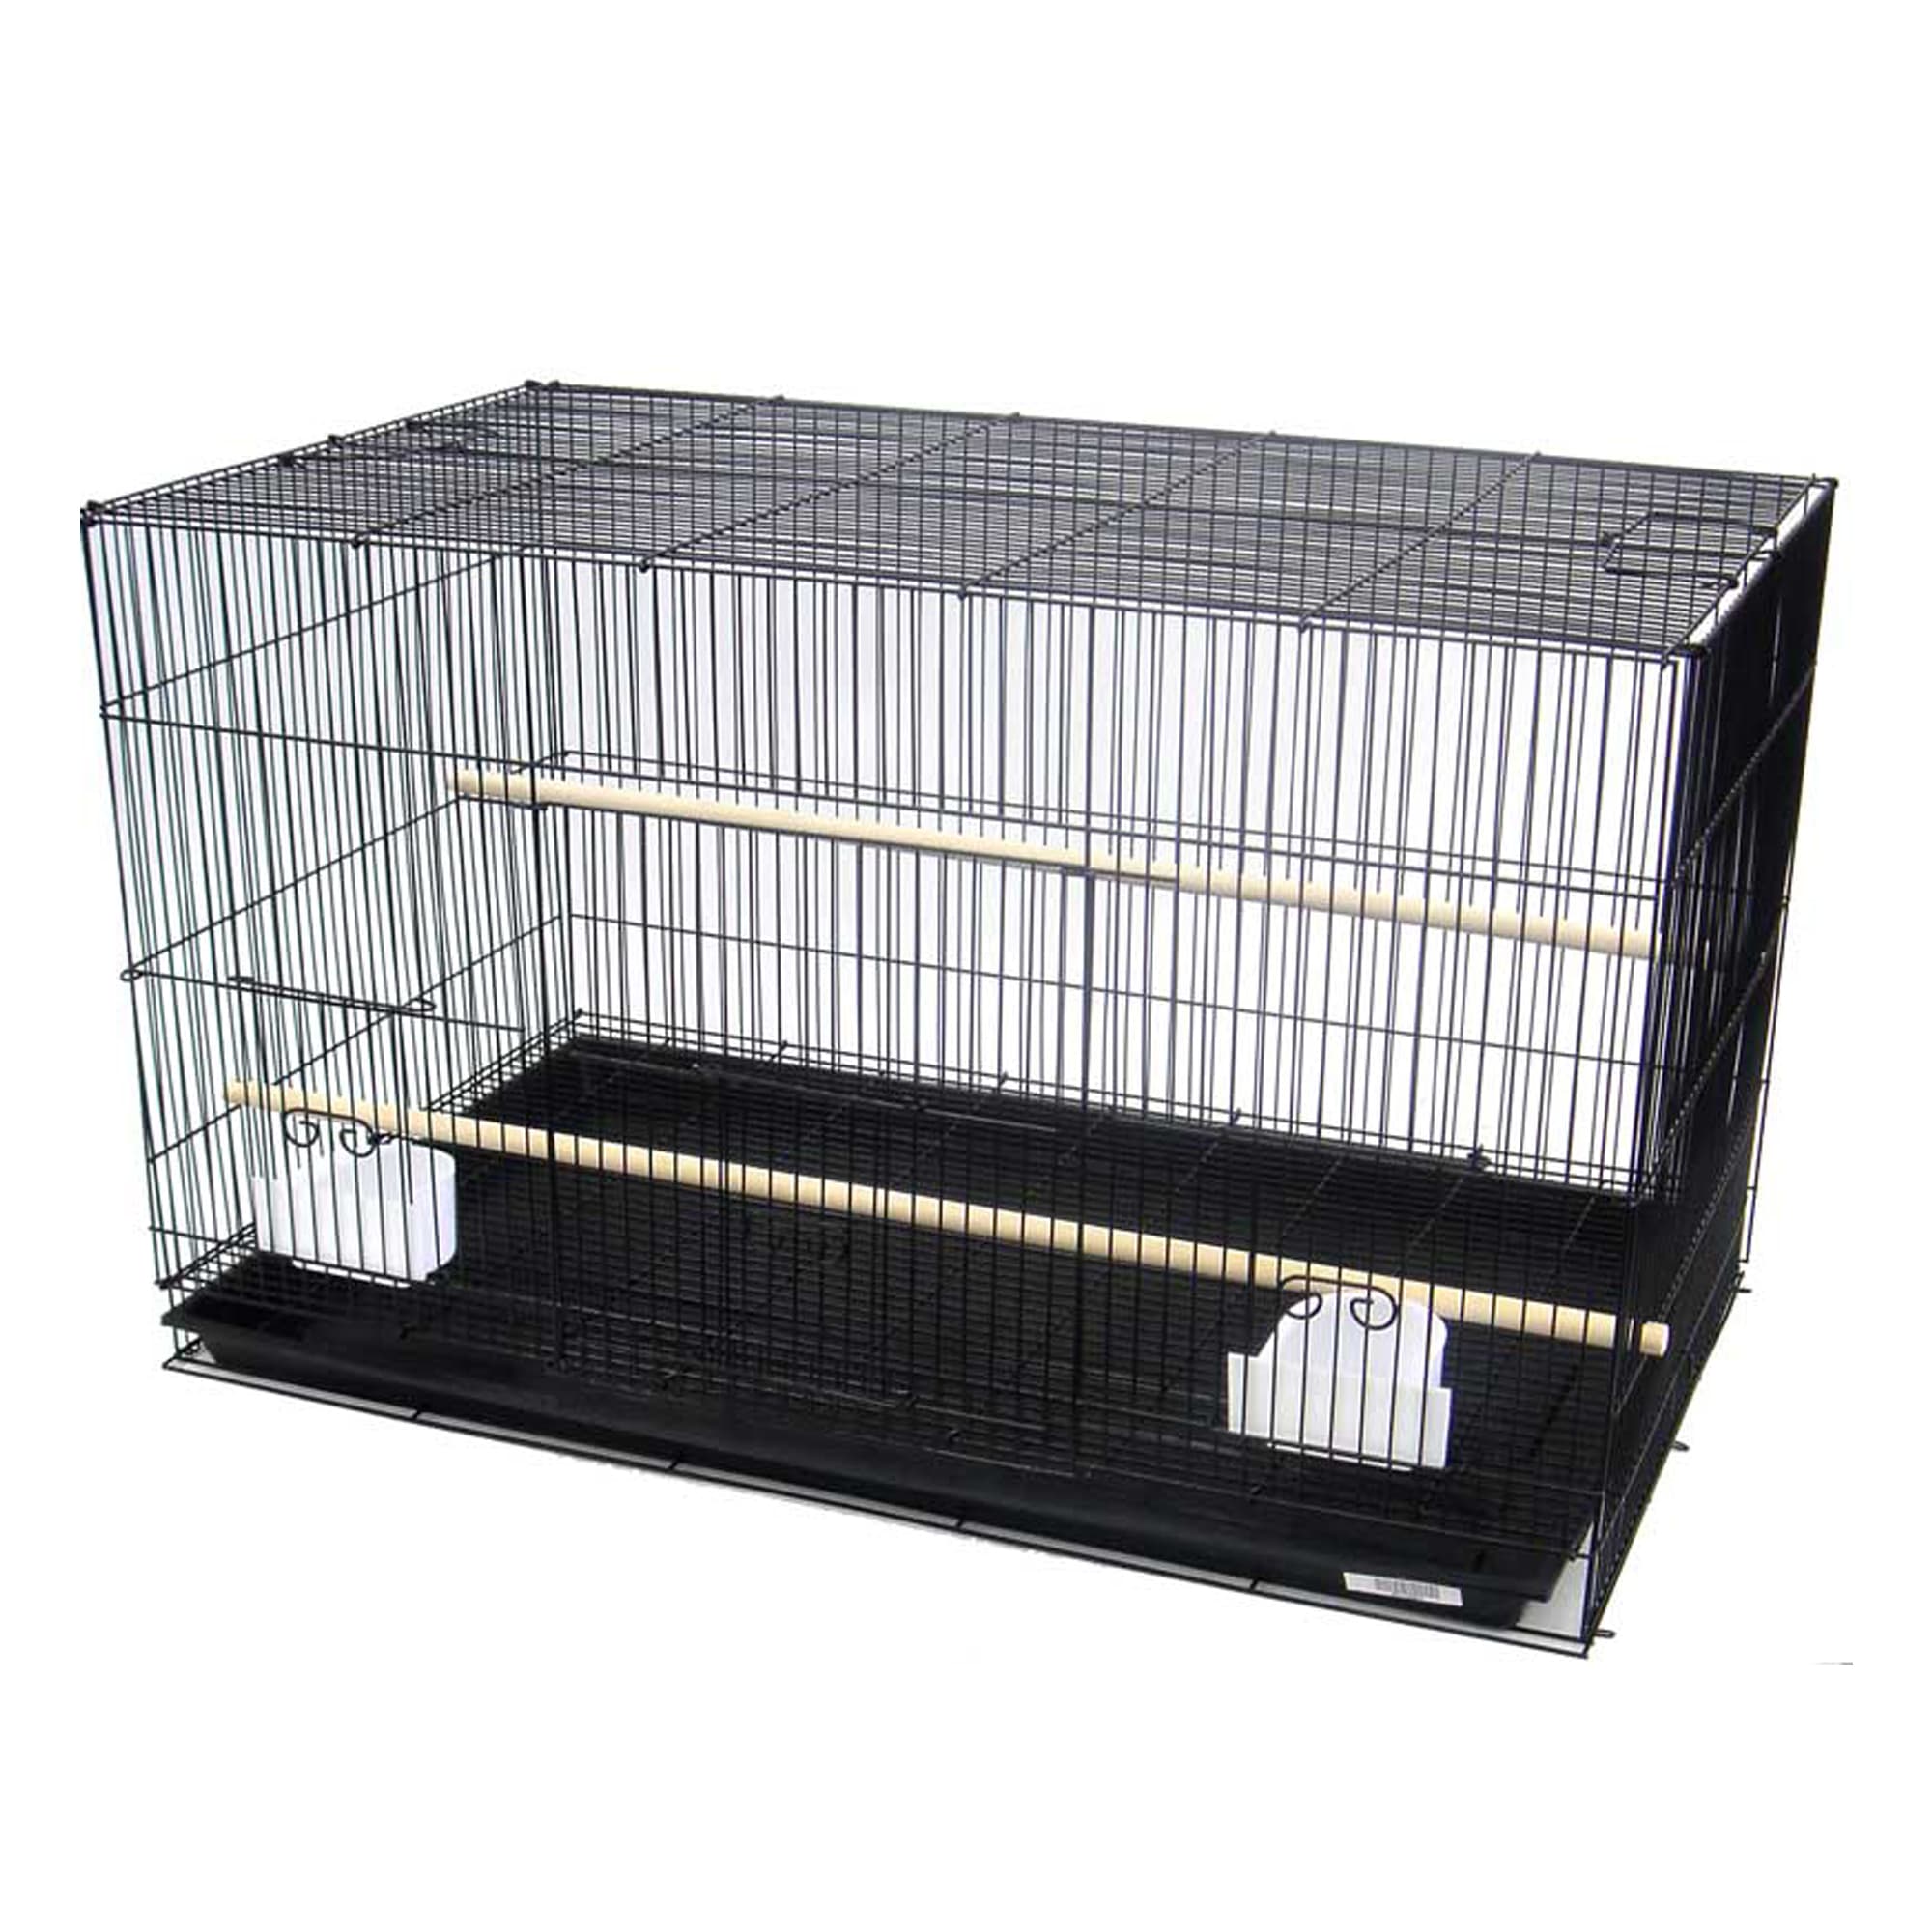 Pack of 6 24 x 16 x 16 H inches Small Breeder Breeding Cages with Center Dividers 24 x 16 x 16 H inches, Black 